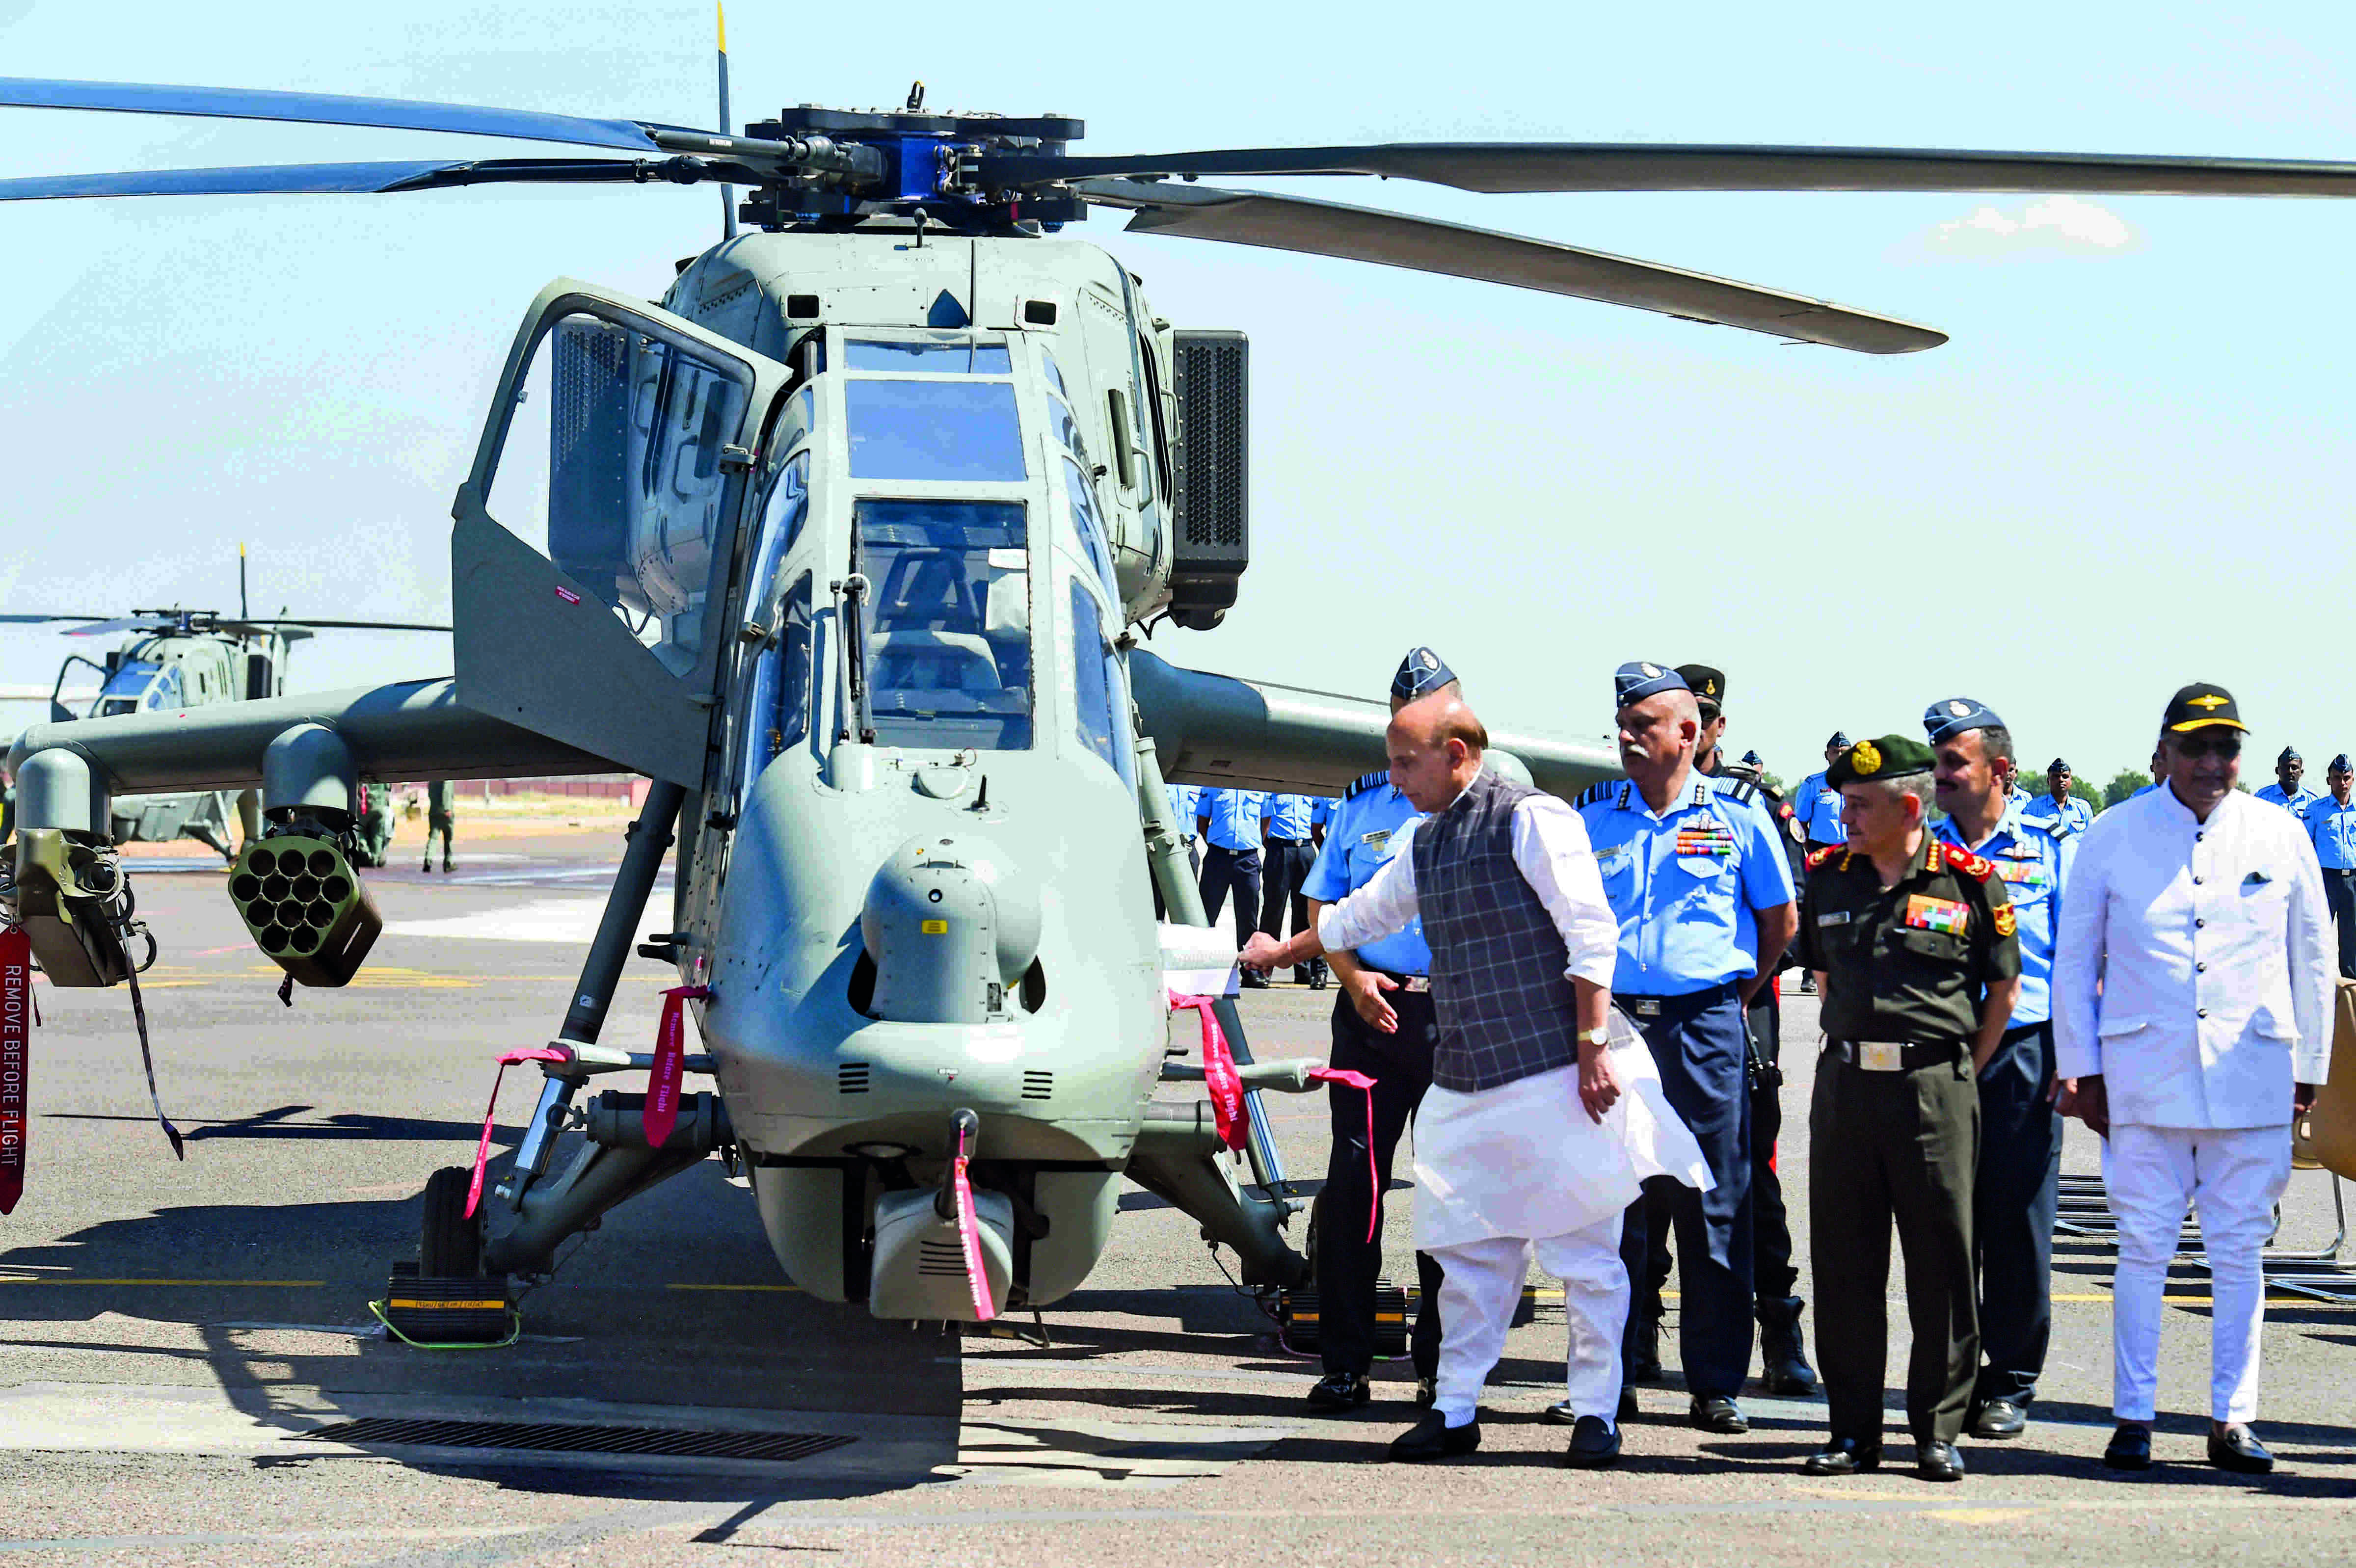 IAF gets new-age indigenously-built Light Combat Helicopter Prachand